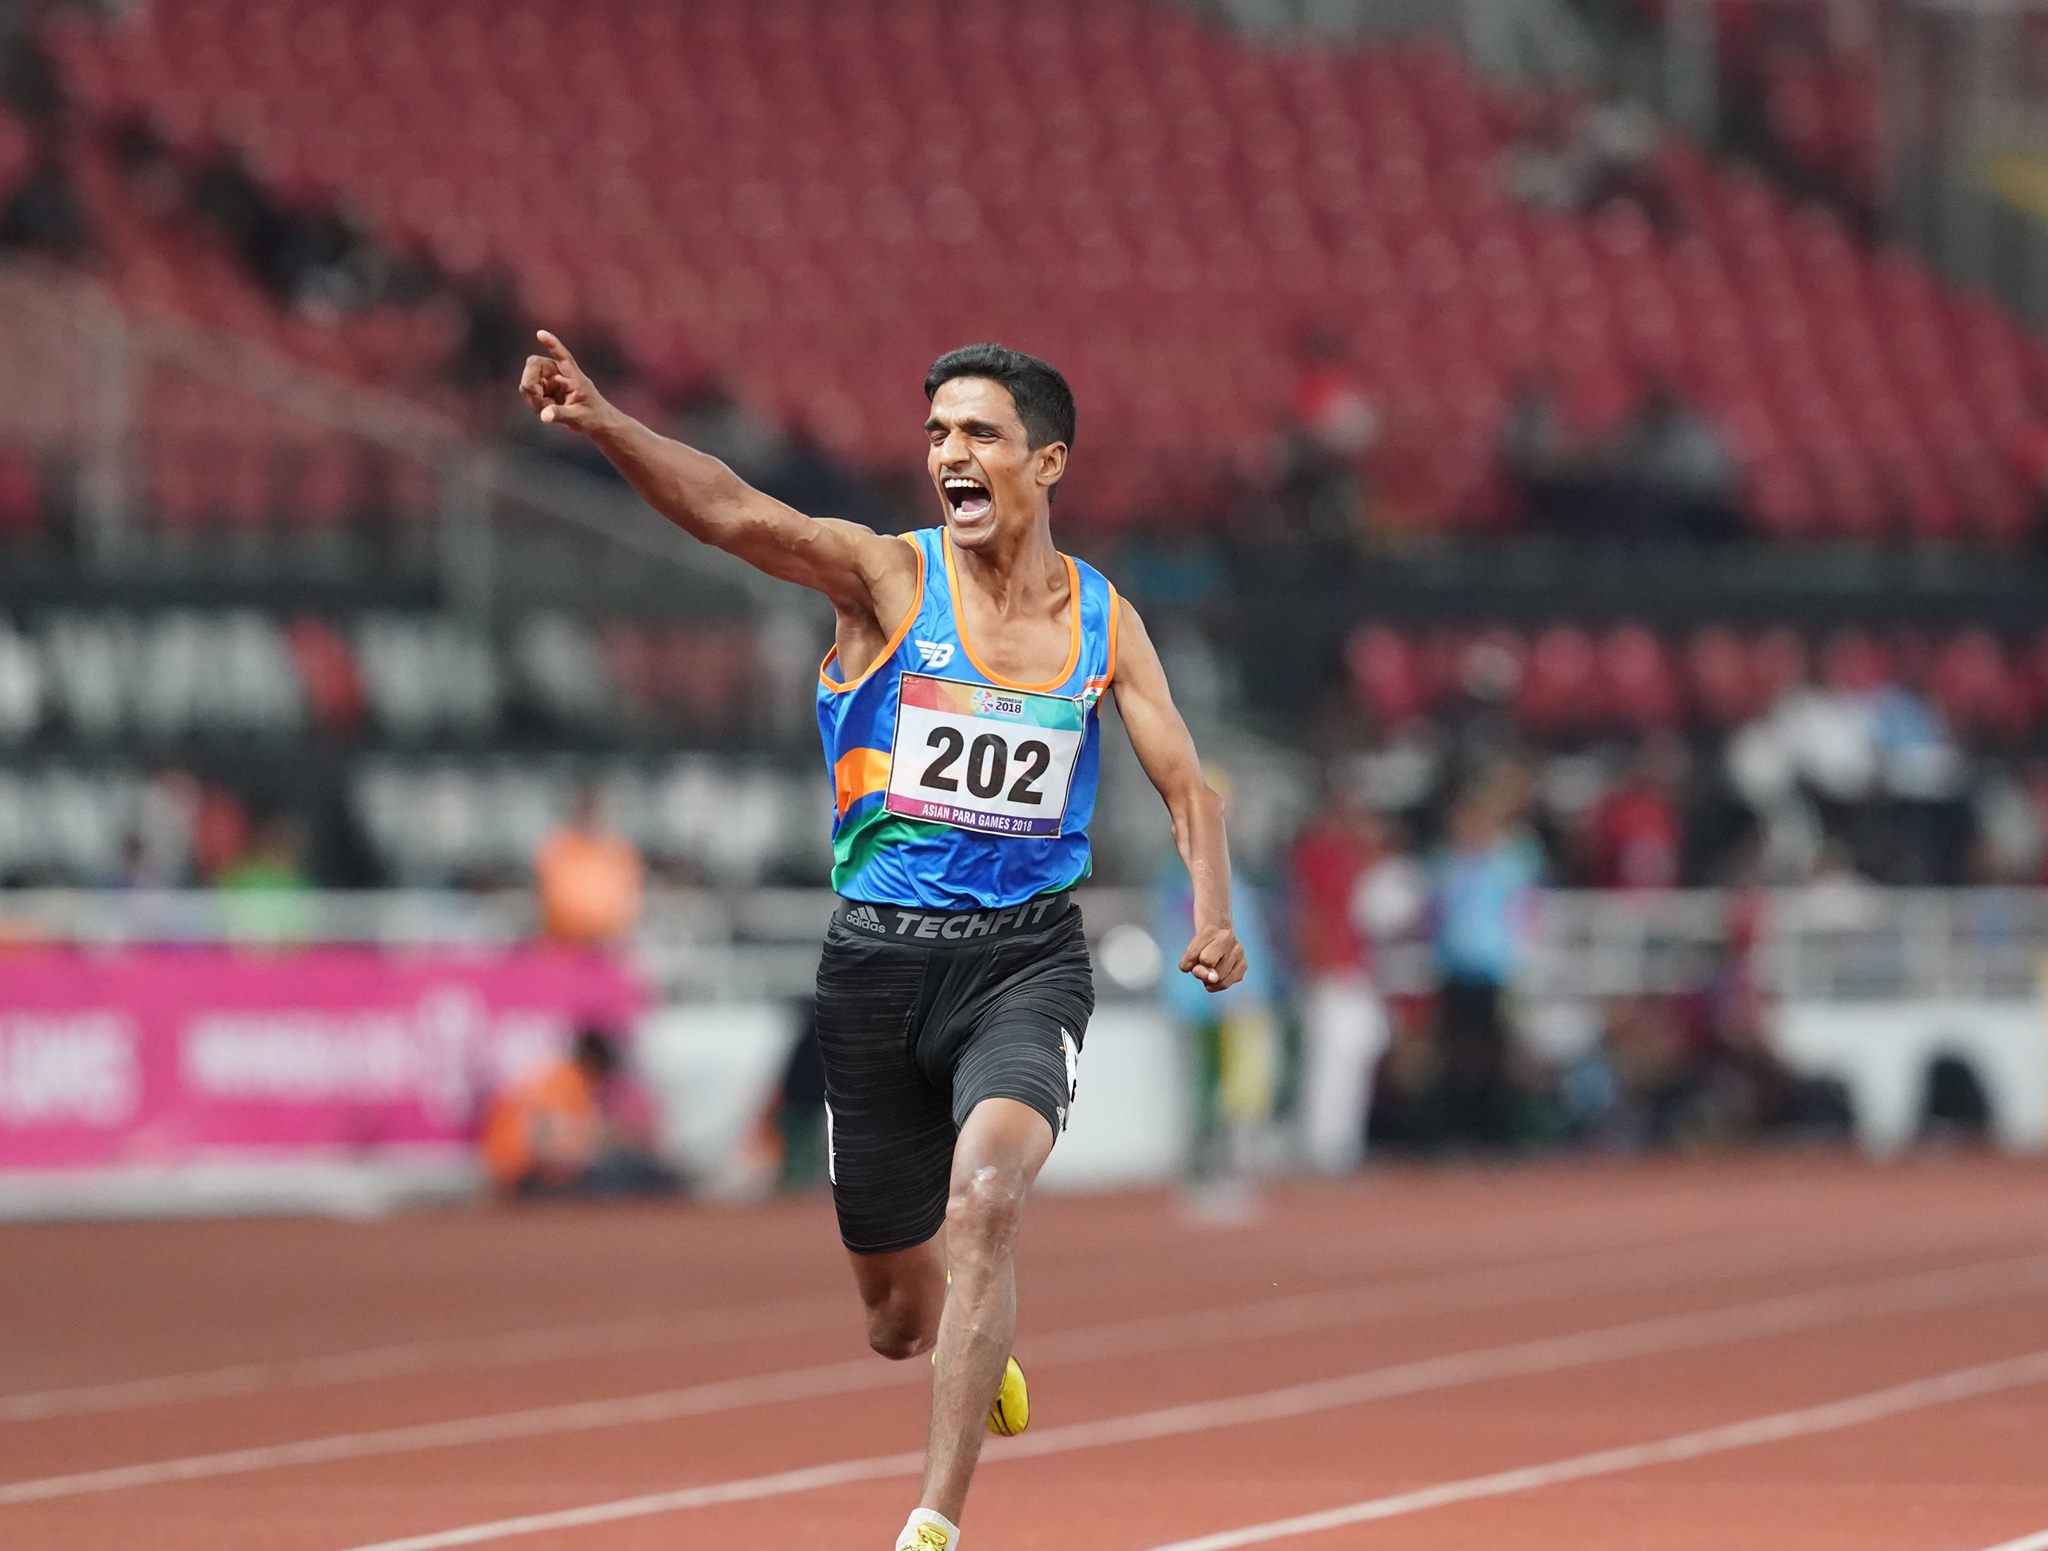 Sent to an orphanage, worked as bus cleaner, yet this man won Gold for India